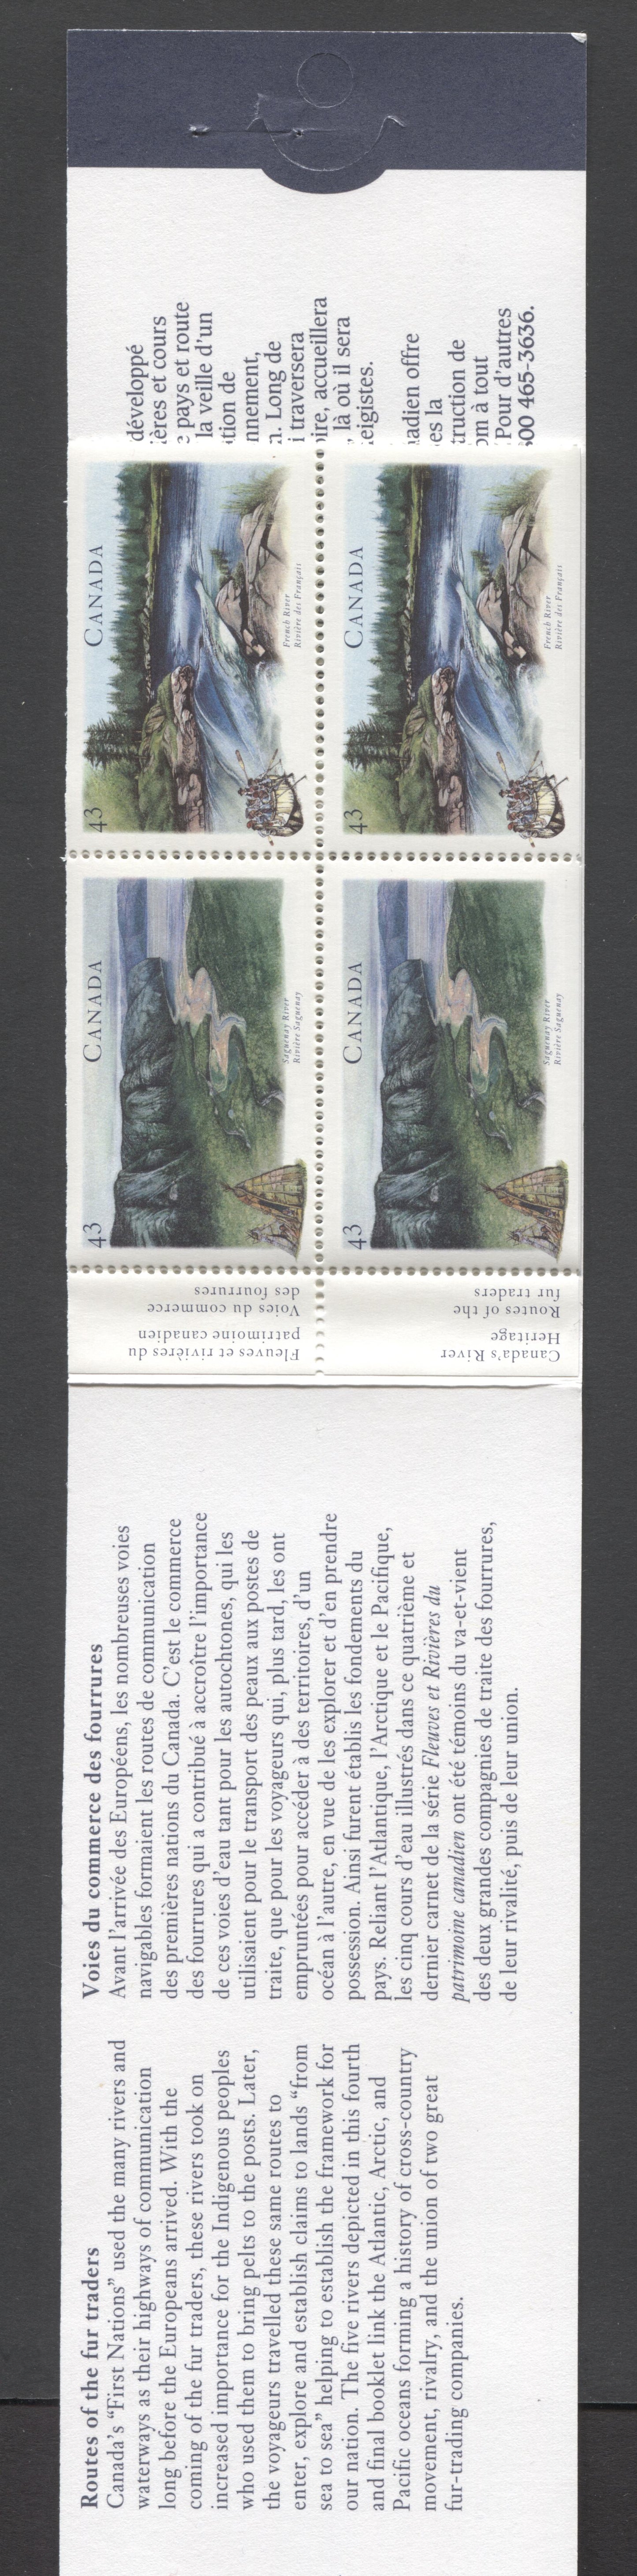 Canada #BK170a-b 1994 Heritage Rivers Issue, Complete $4.30 Booklet, Harrison Paper, Dead Paper, 4 mm GT-4 Tagging